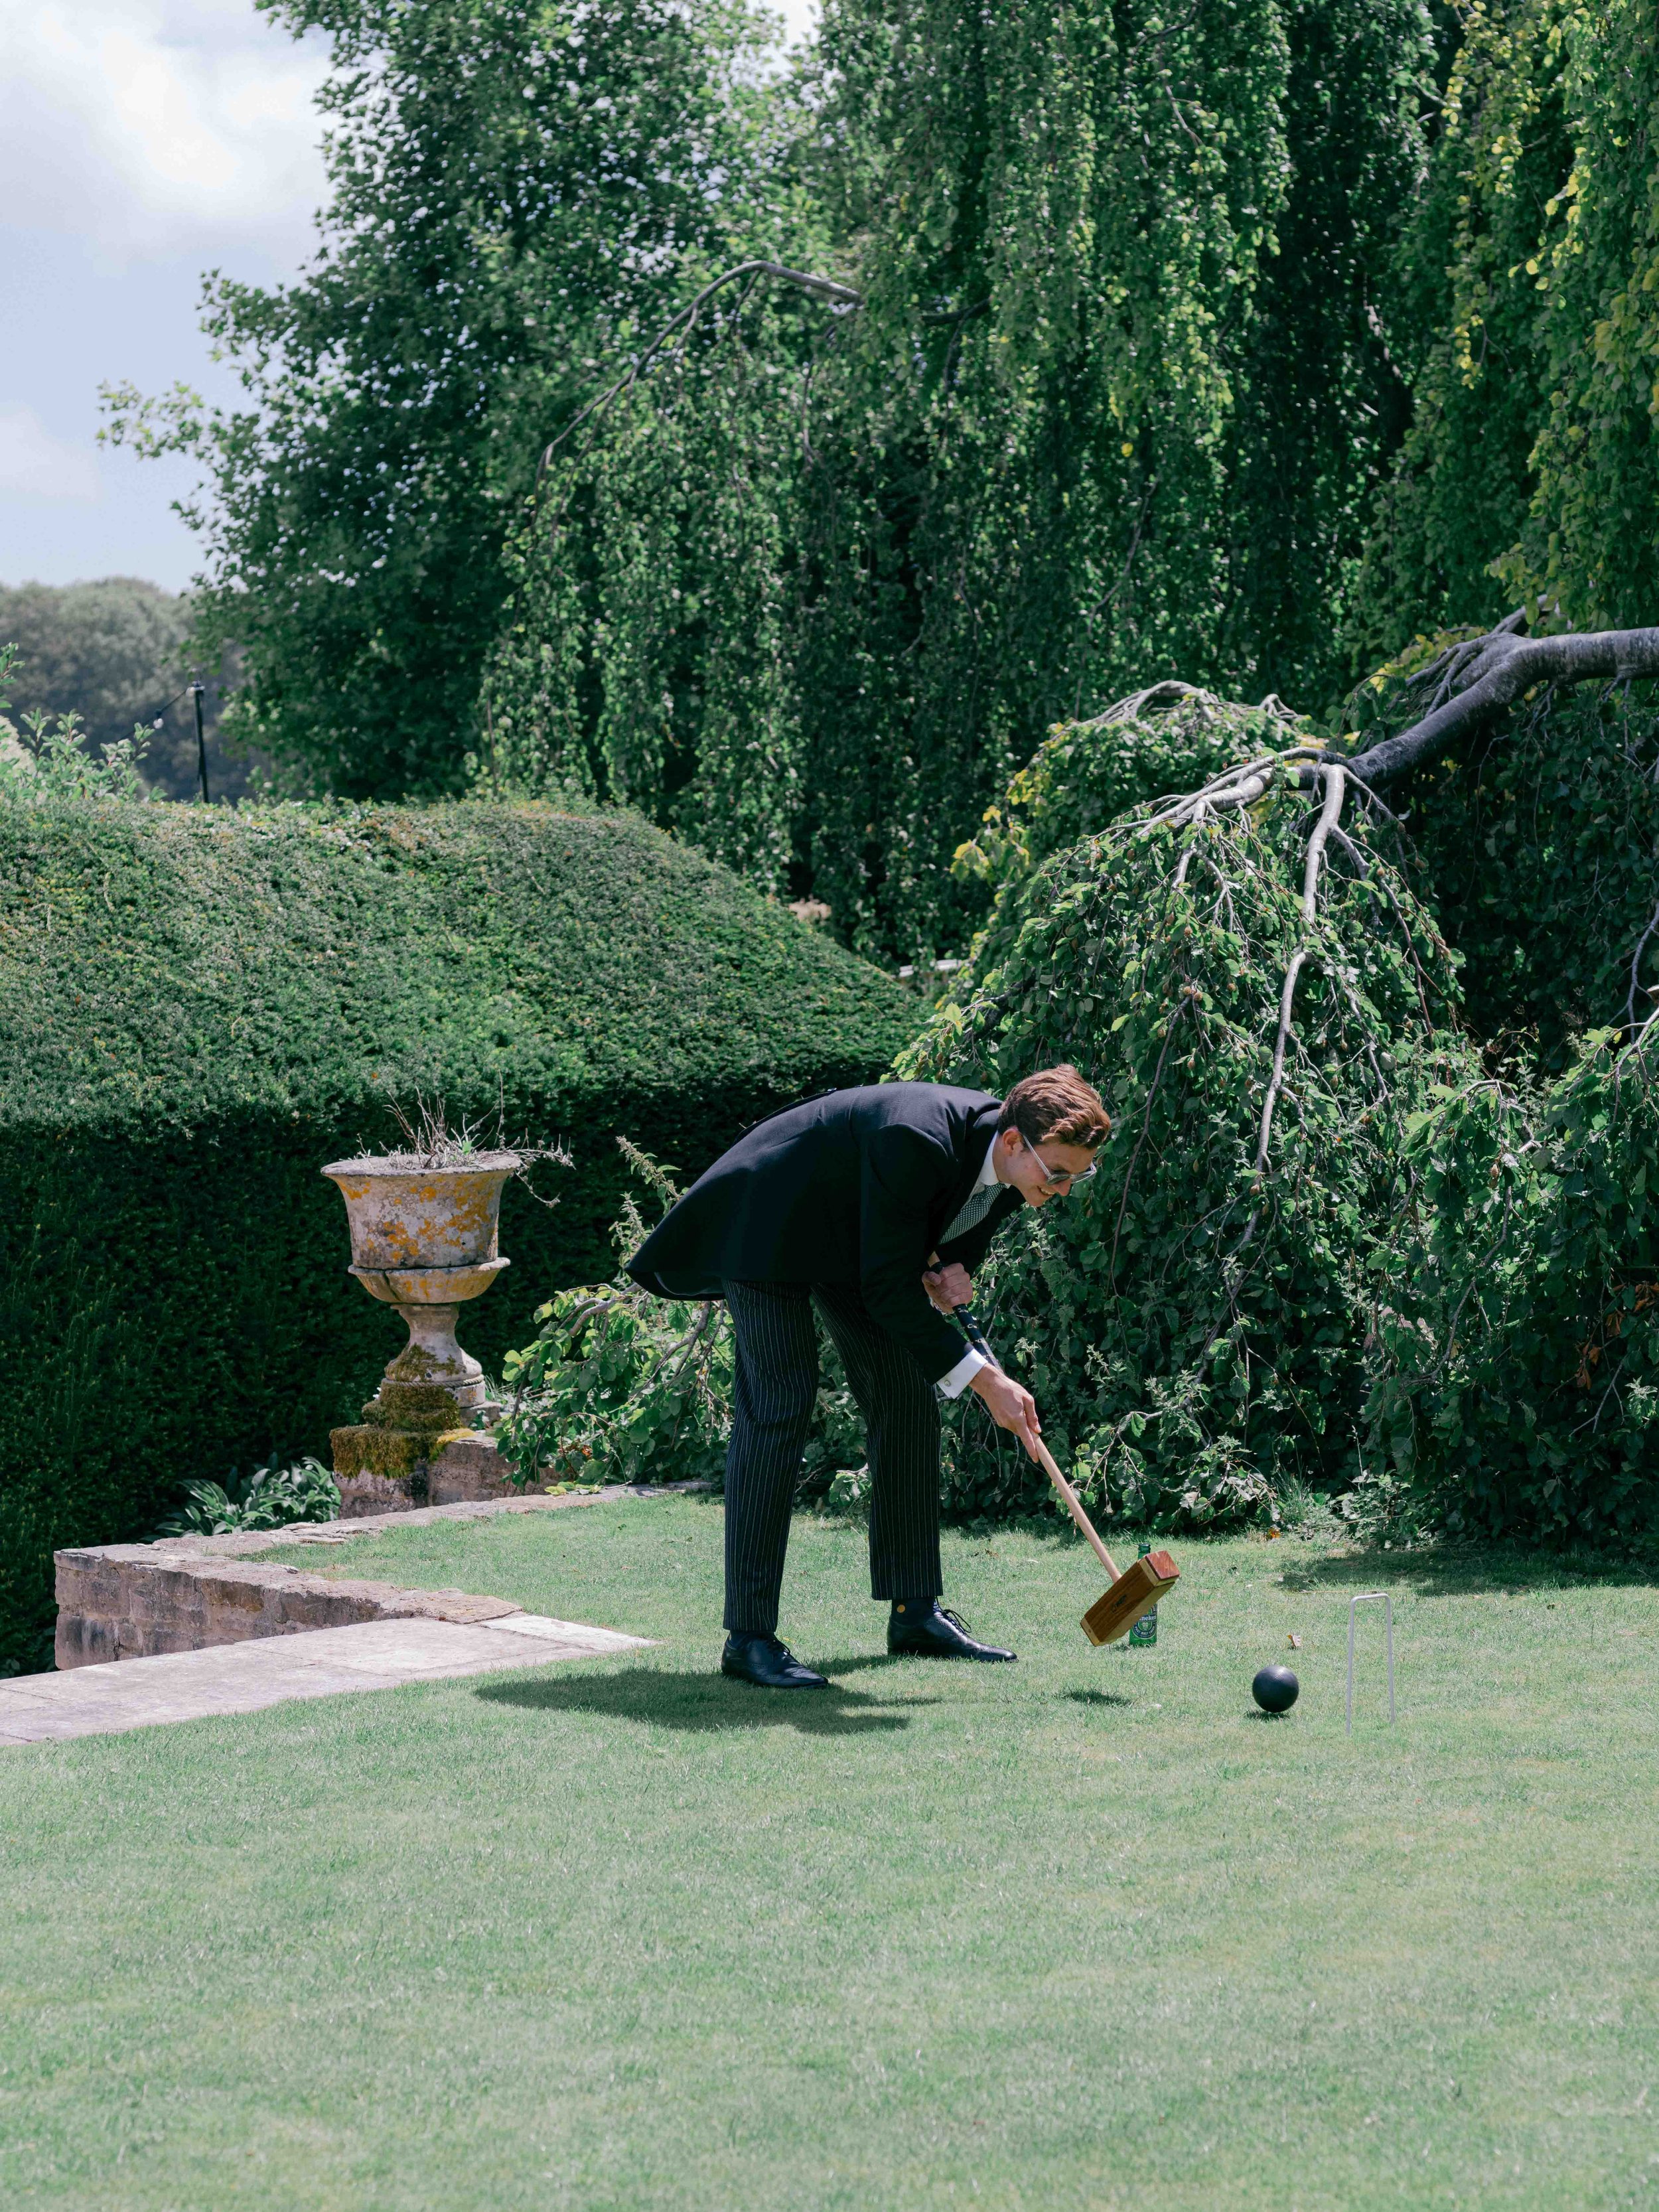  Groomsmen playing croquet at Came House 